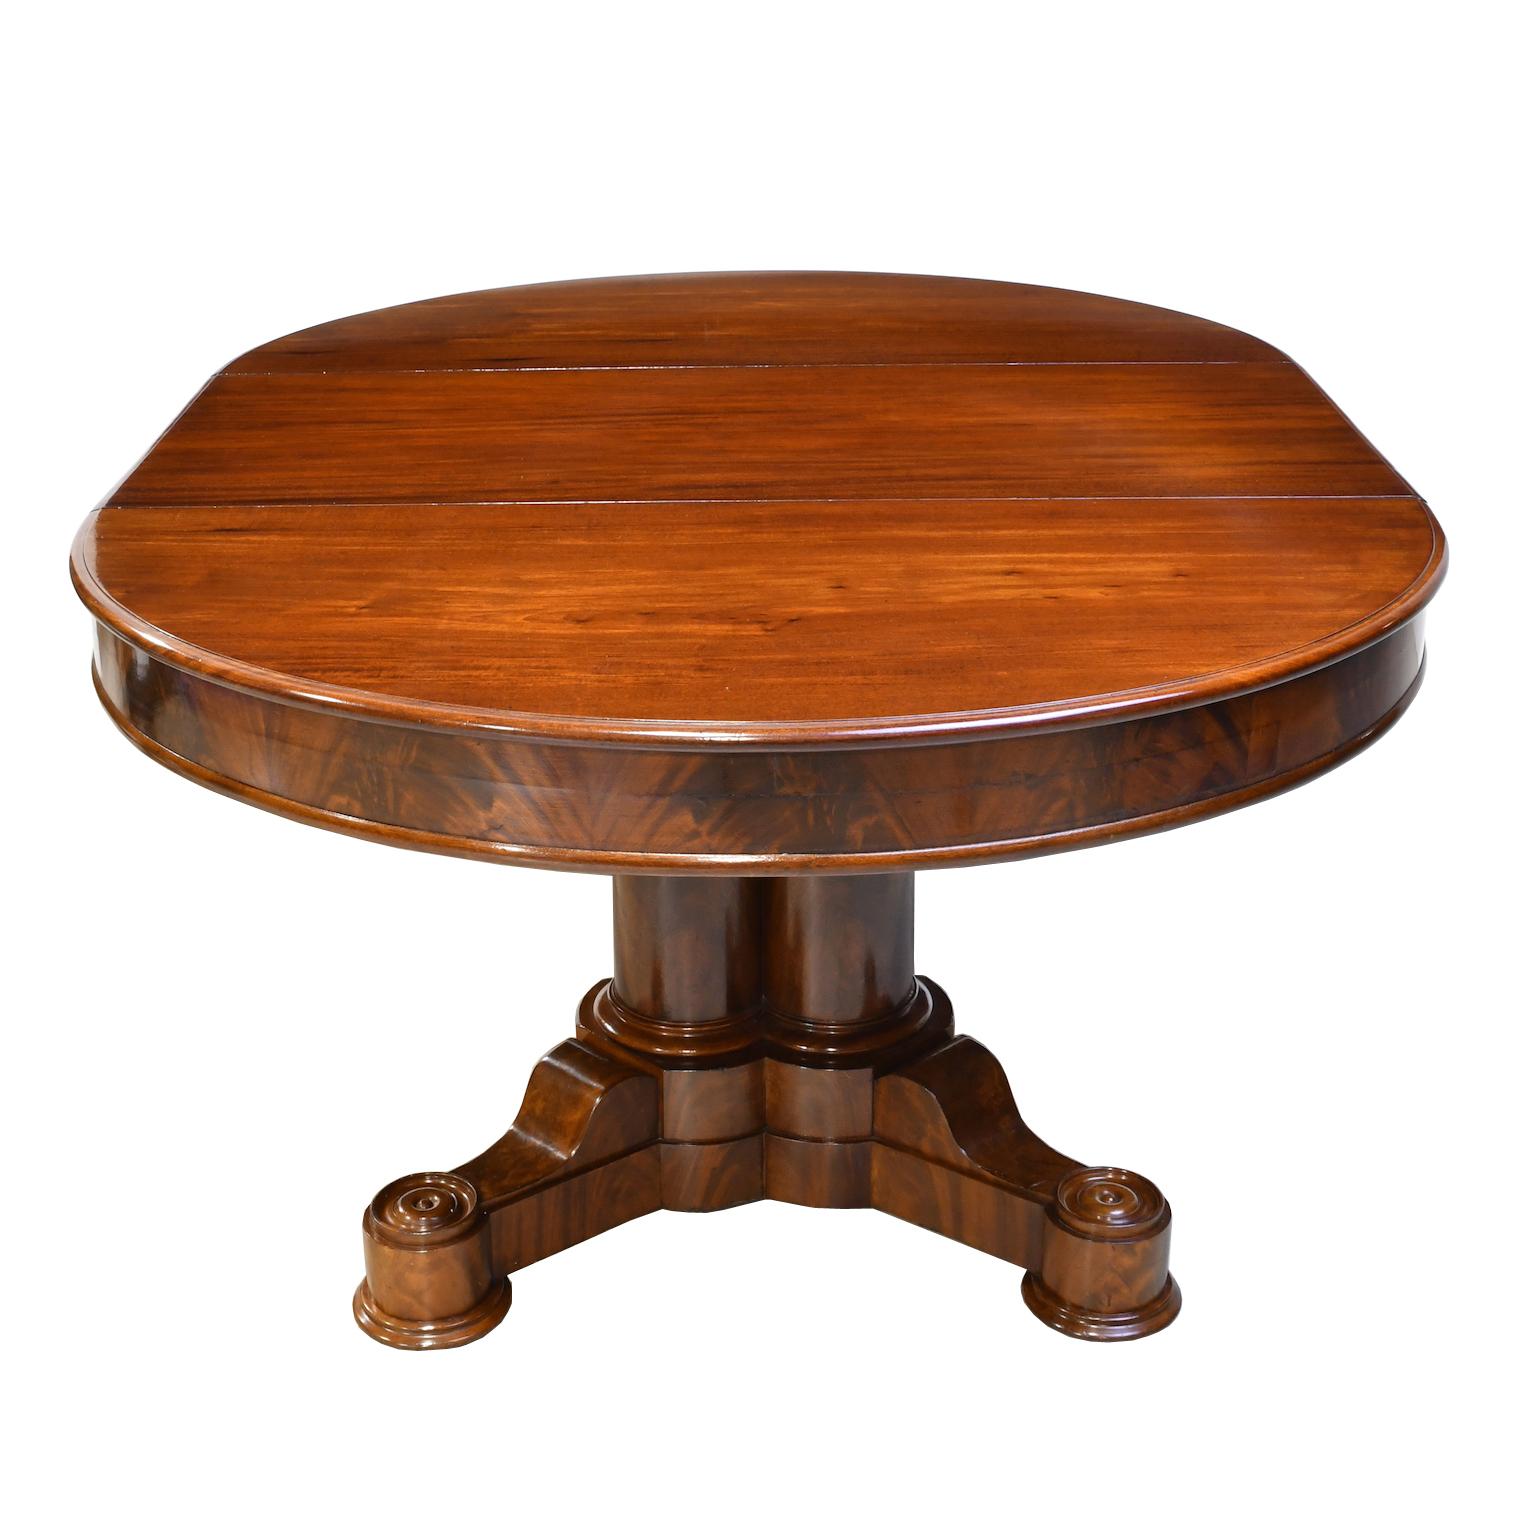 American Empire Oval Extension Dining Table in Mahogany with Pedestal Base 1